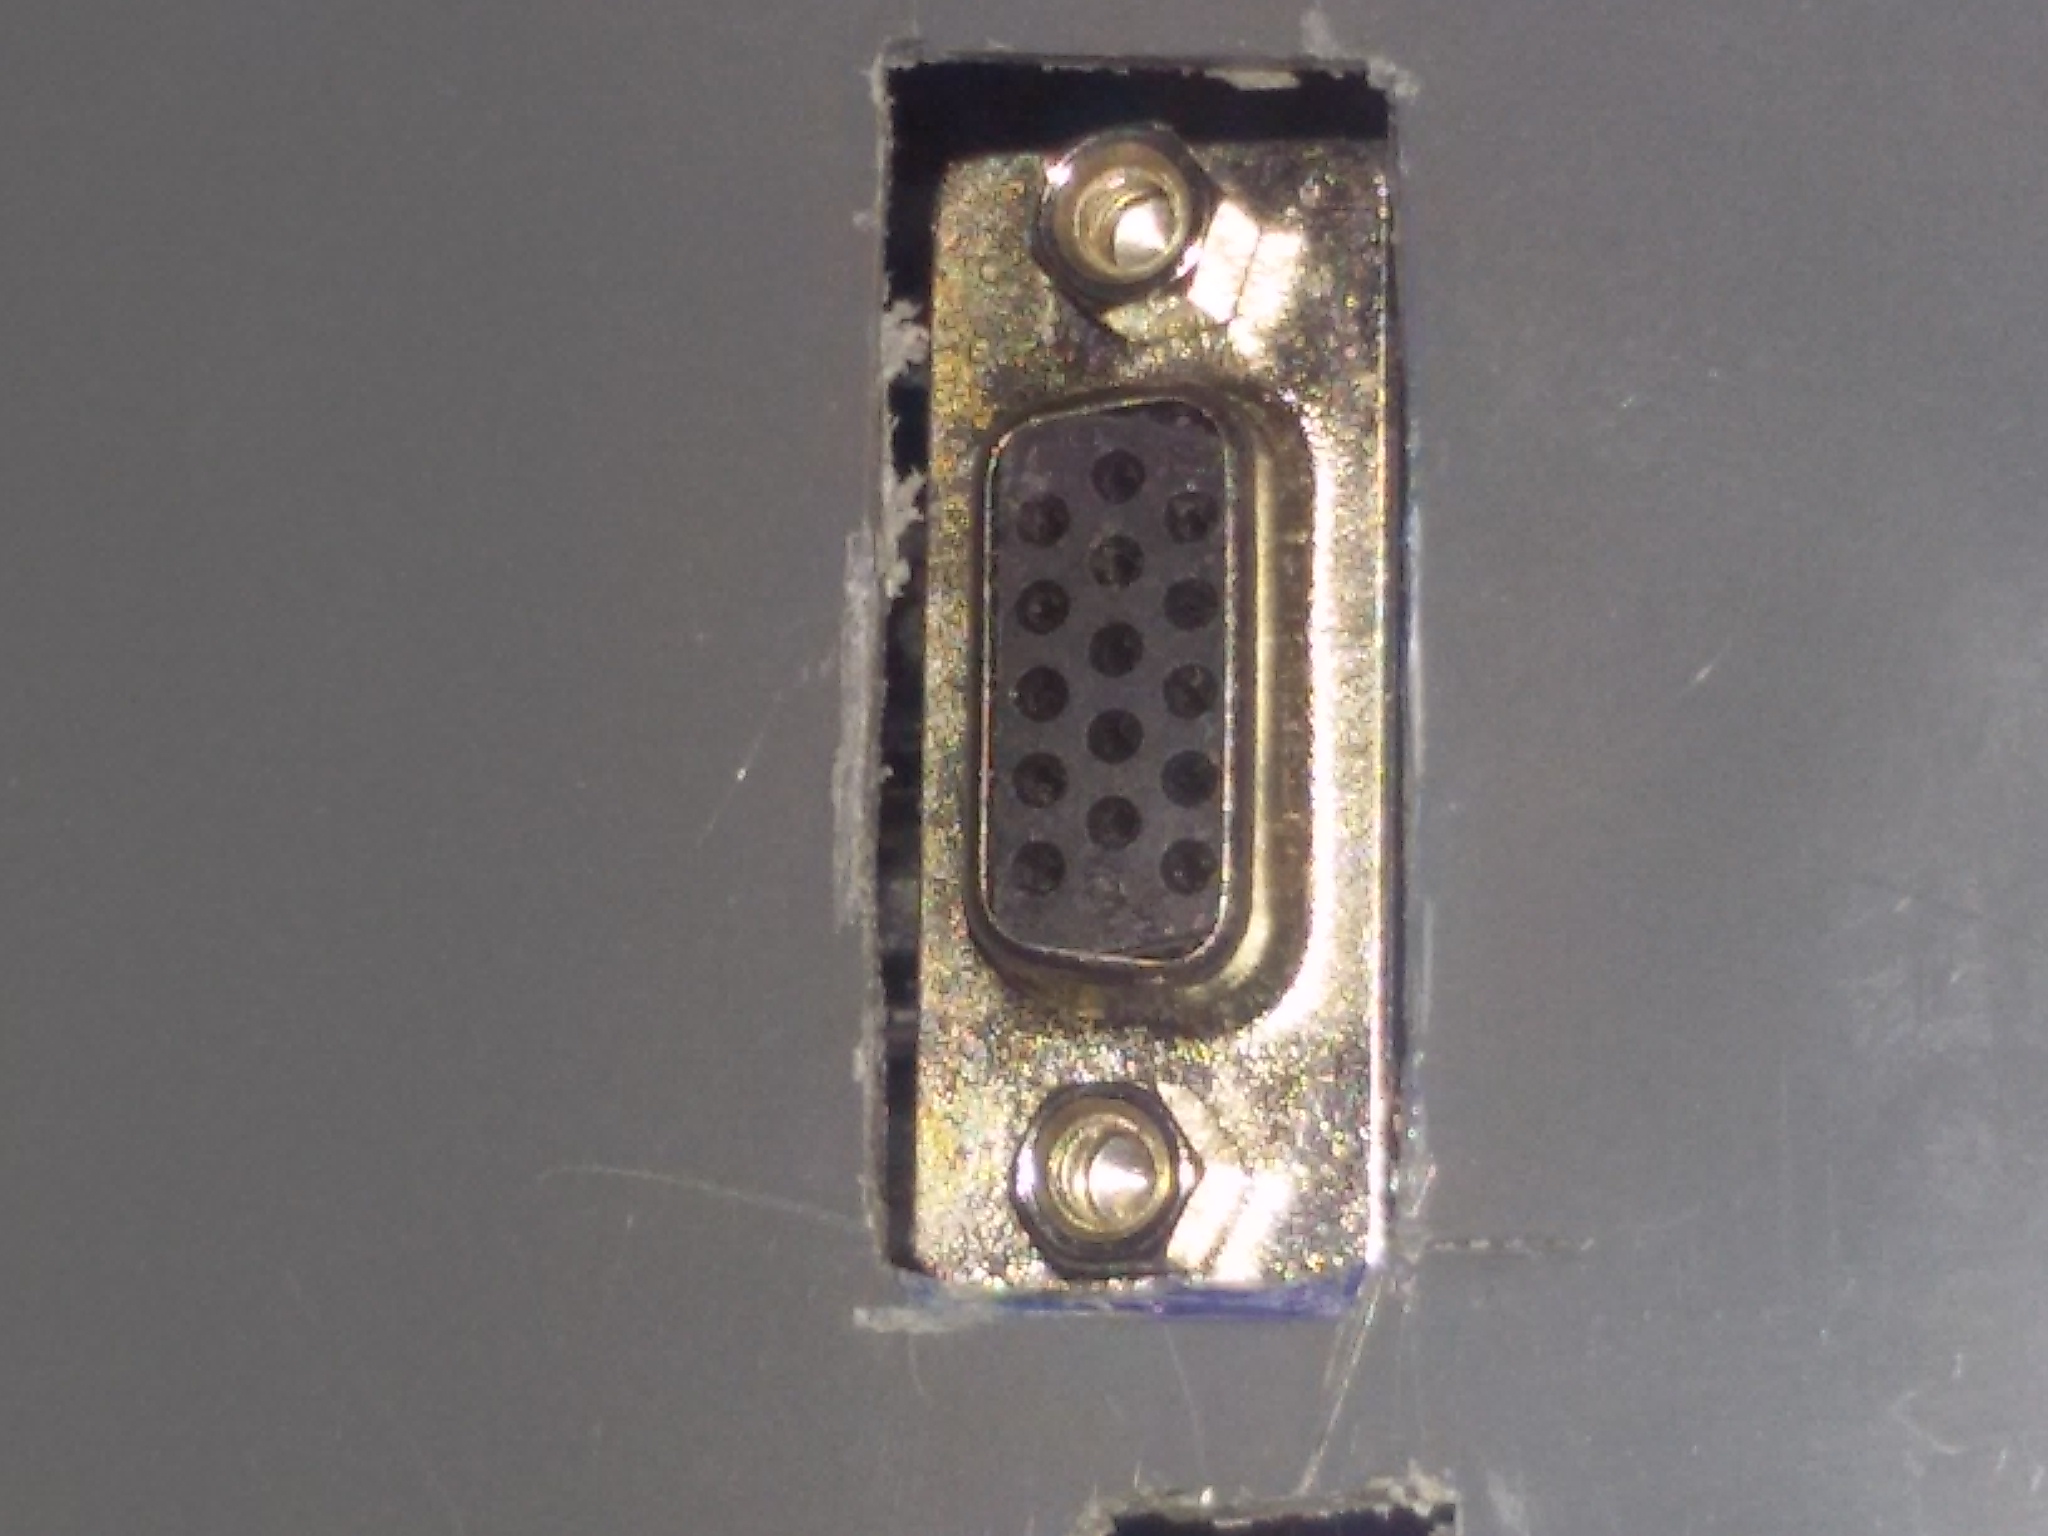 Female connector on the power box